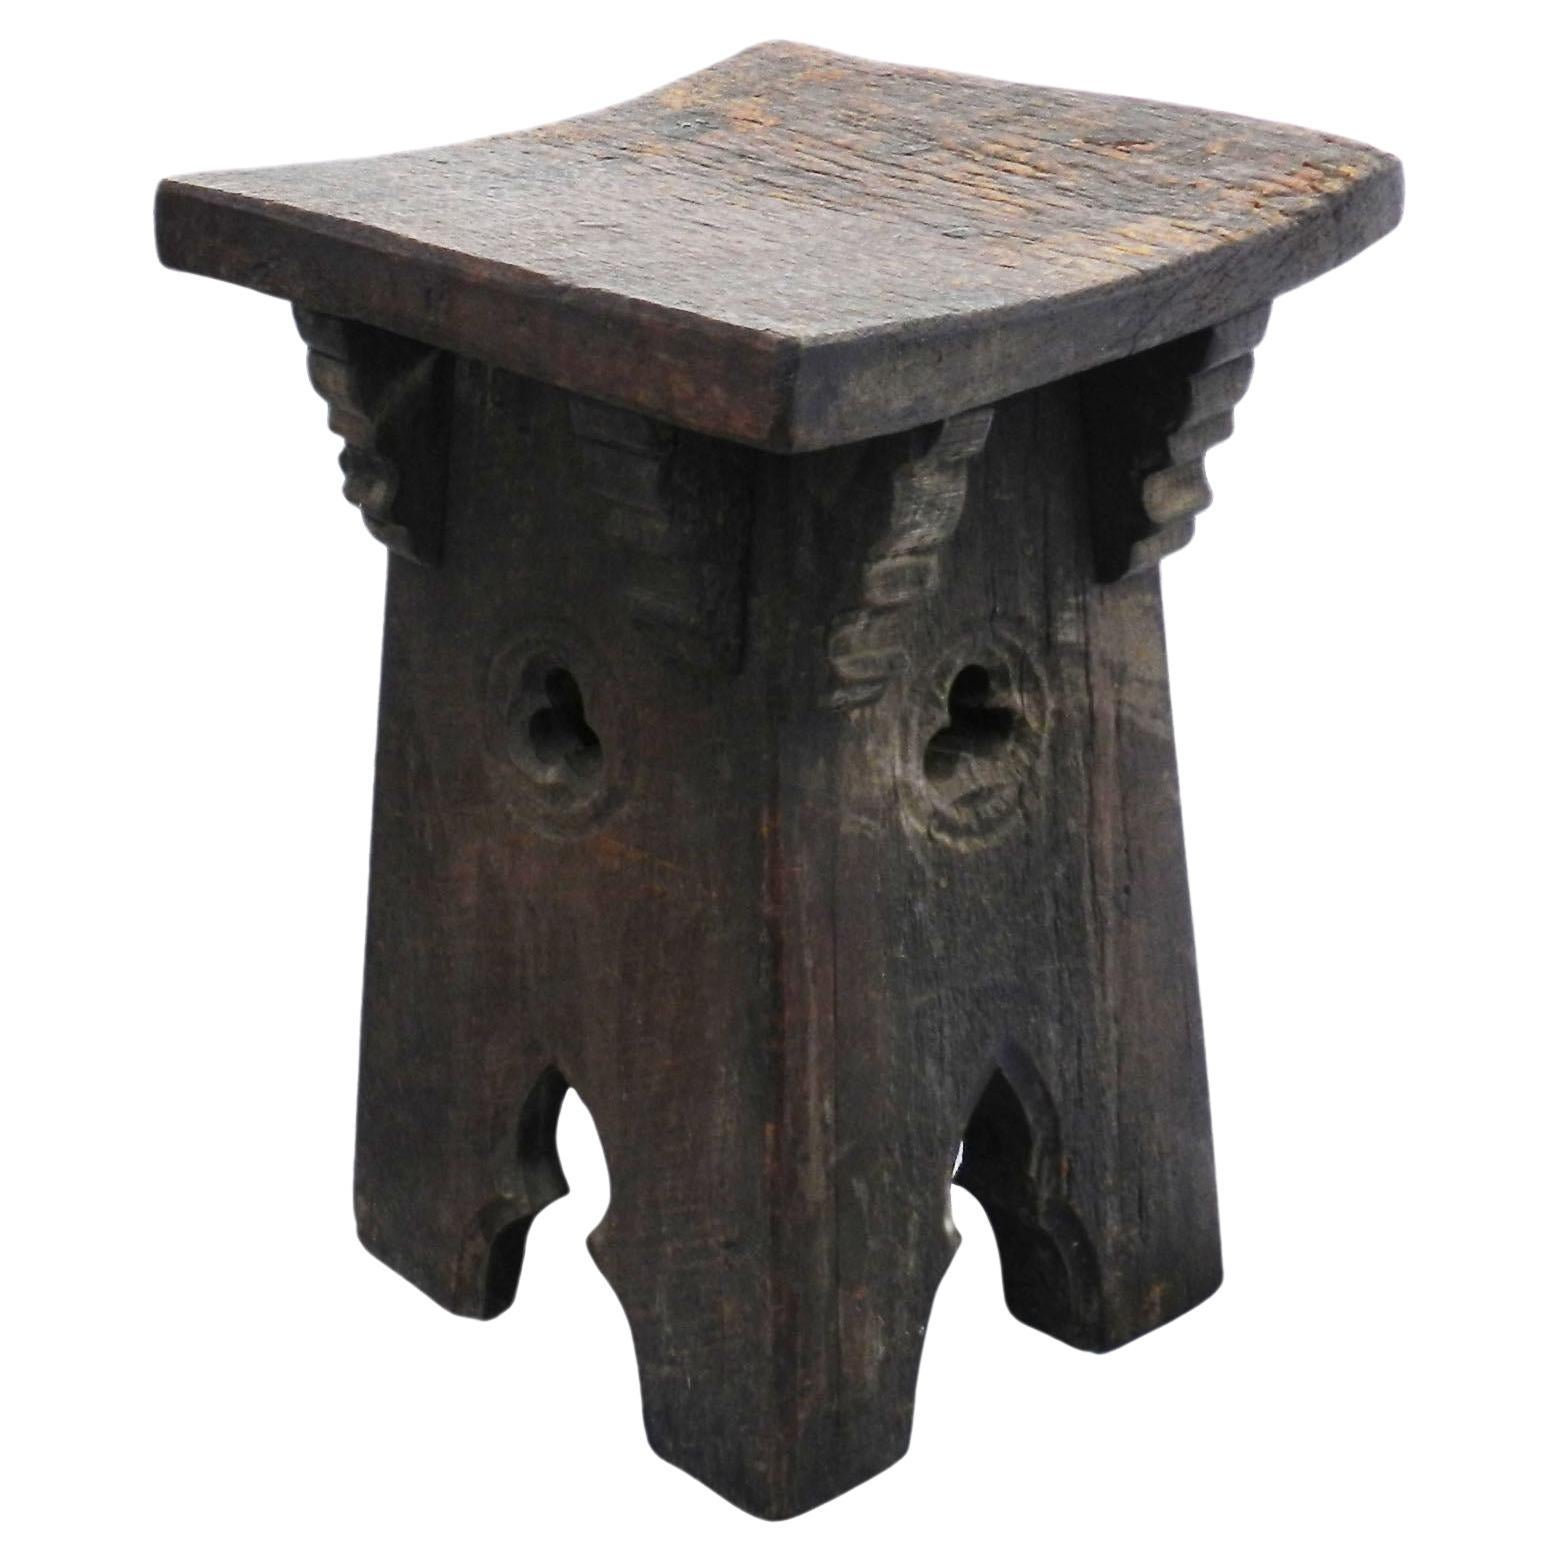 Tabouret Arts & Crafts Brutalist Gothic Rev French Country House vers 1910 (B)